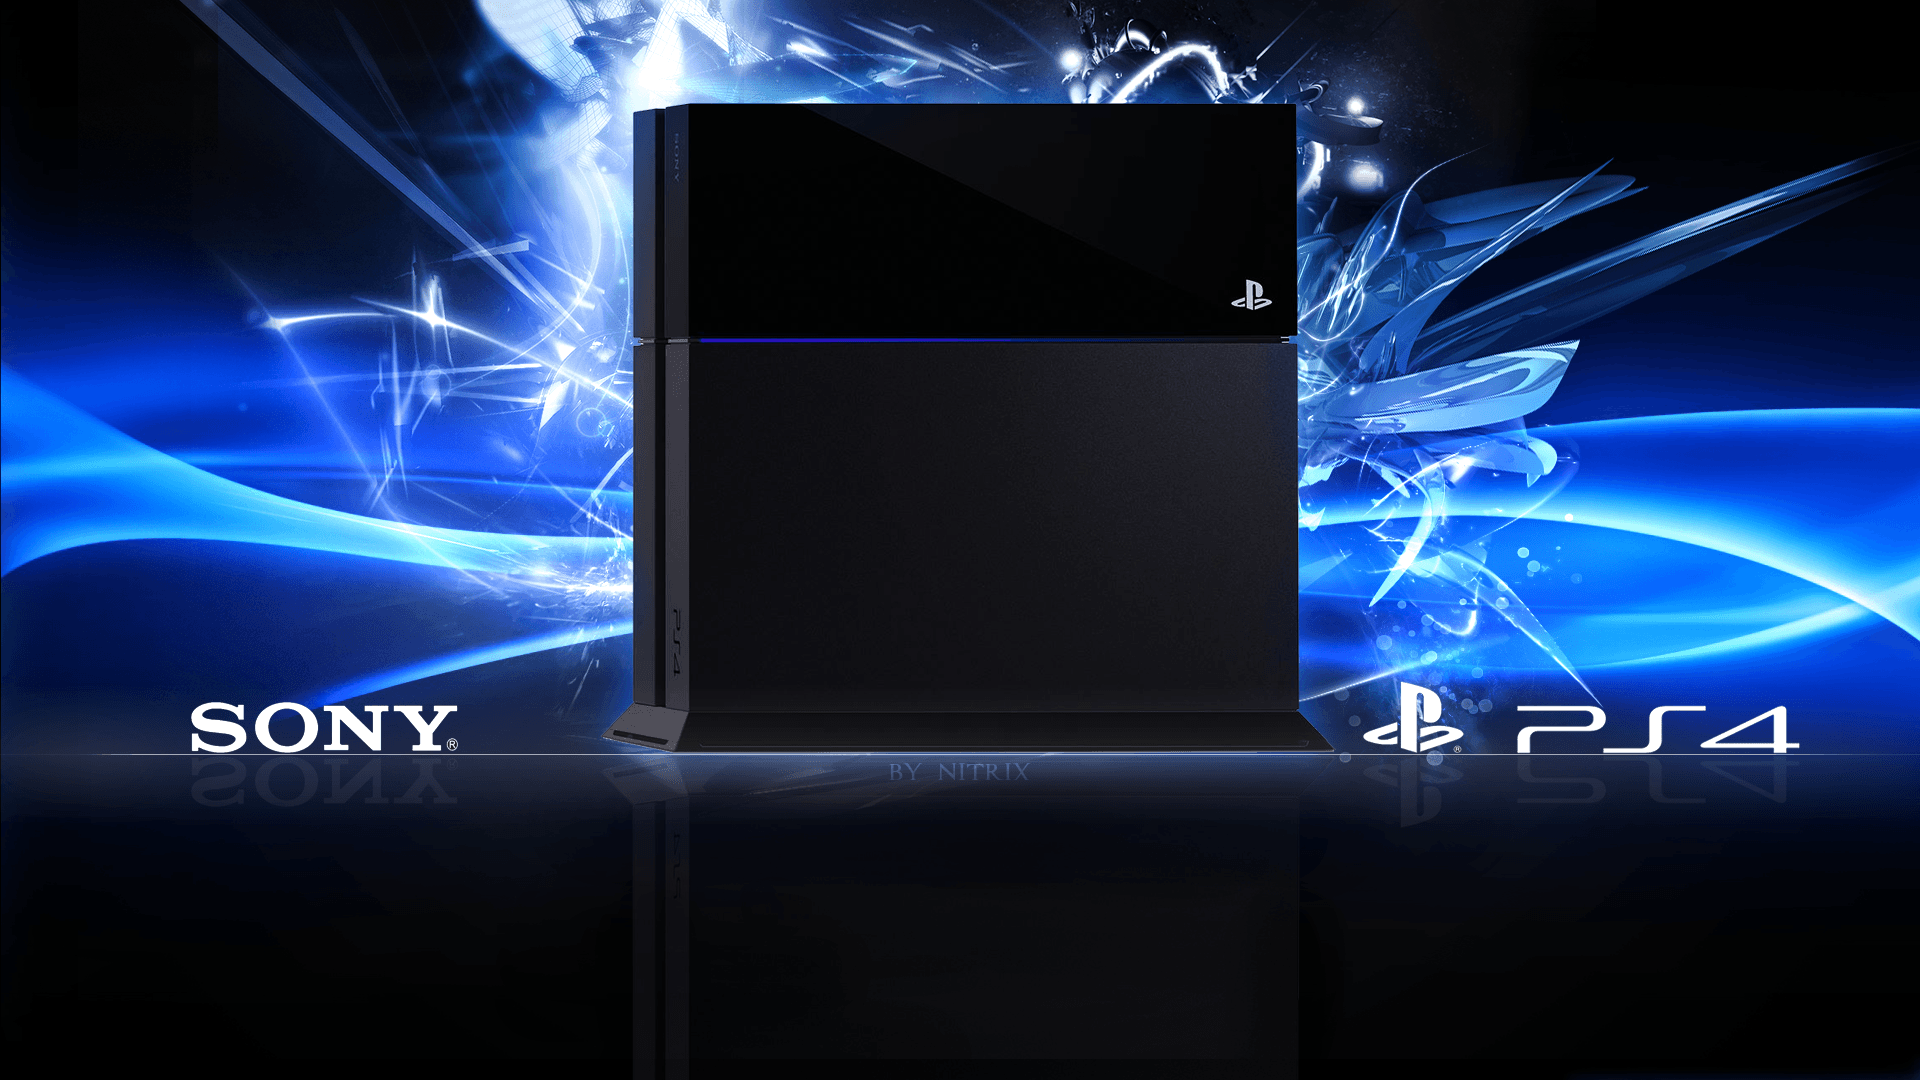 Ps4 Wallpaper. Playstation, Best gaming console, Playstation 4